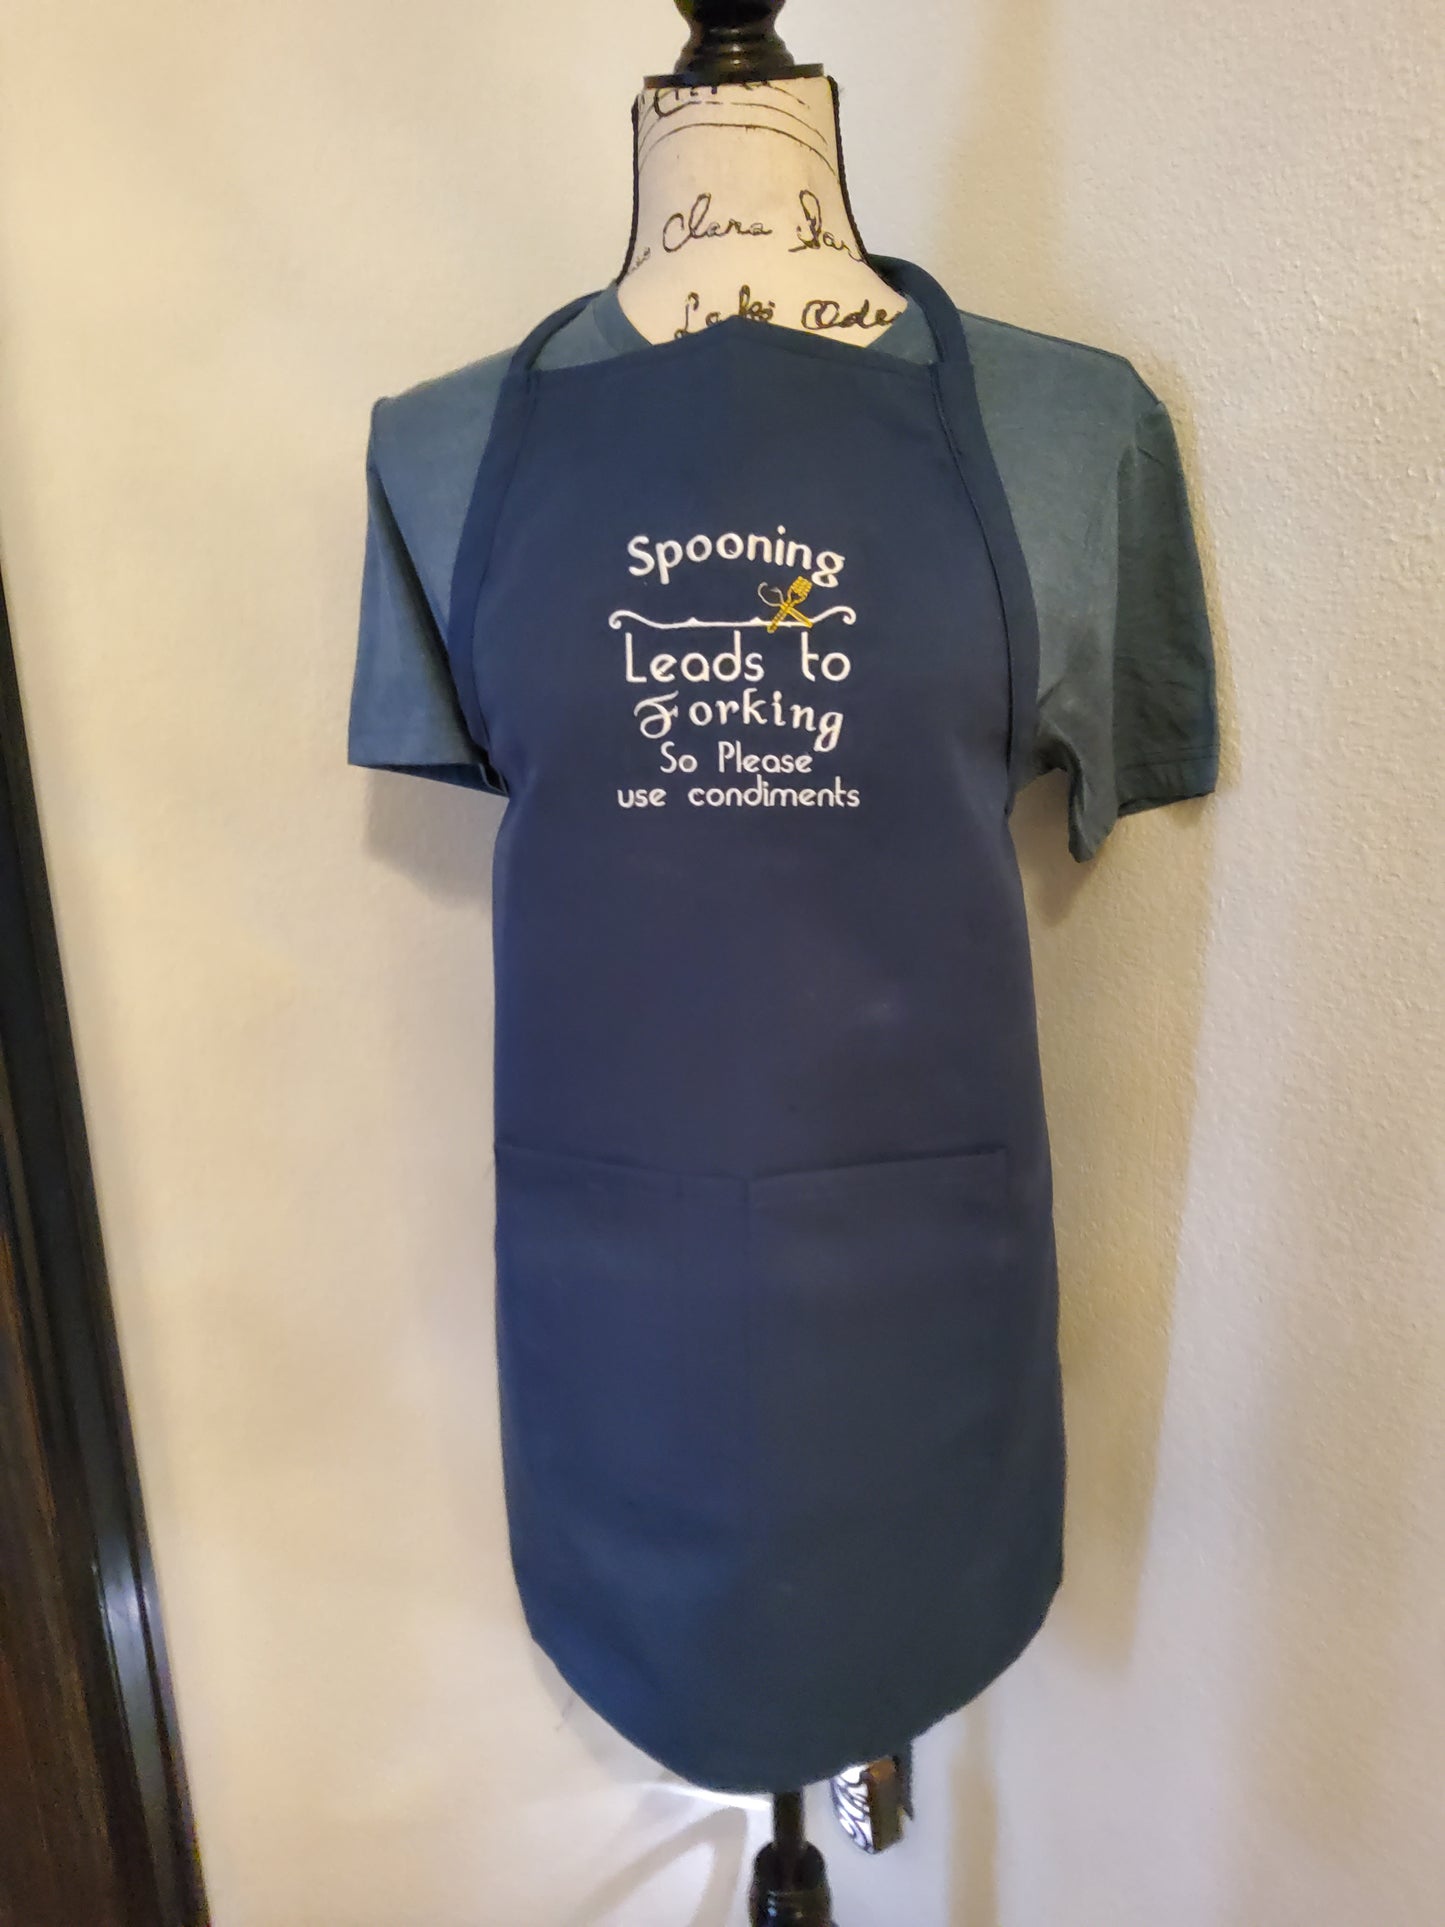 "Spooning/Forking" Custom Embroidered Apron